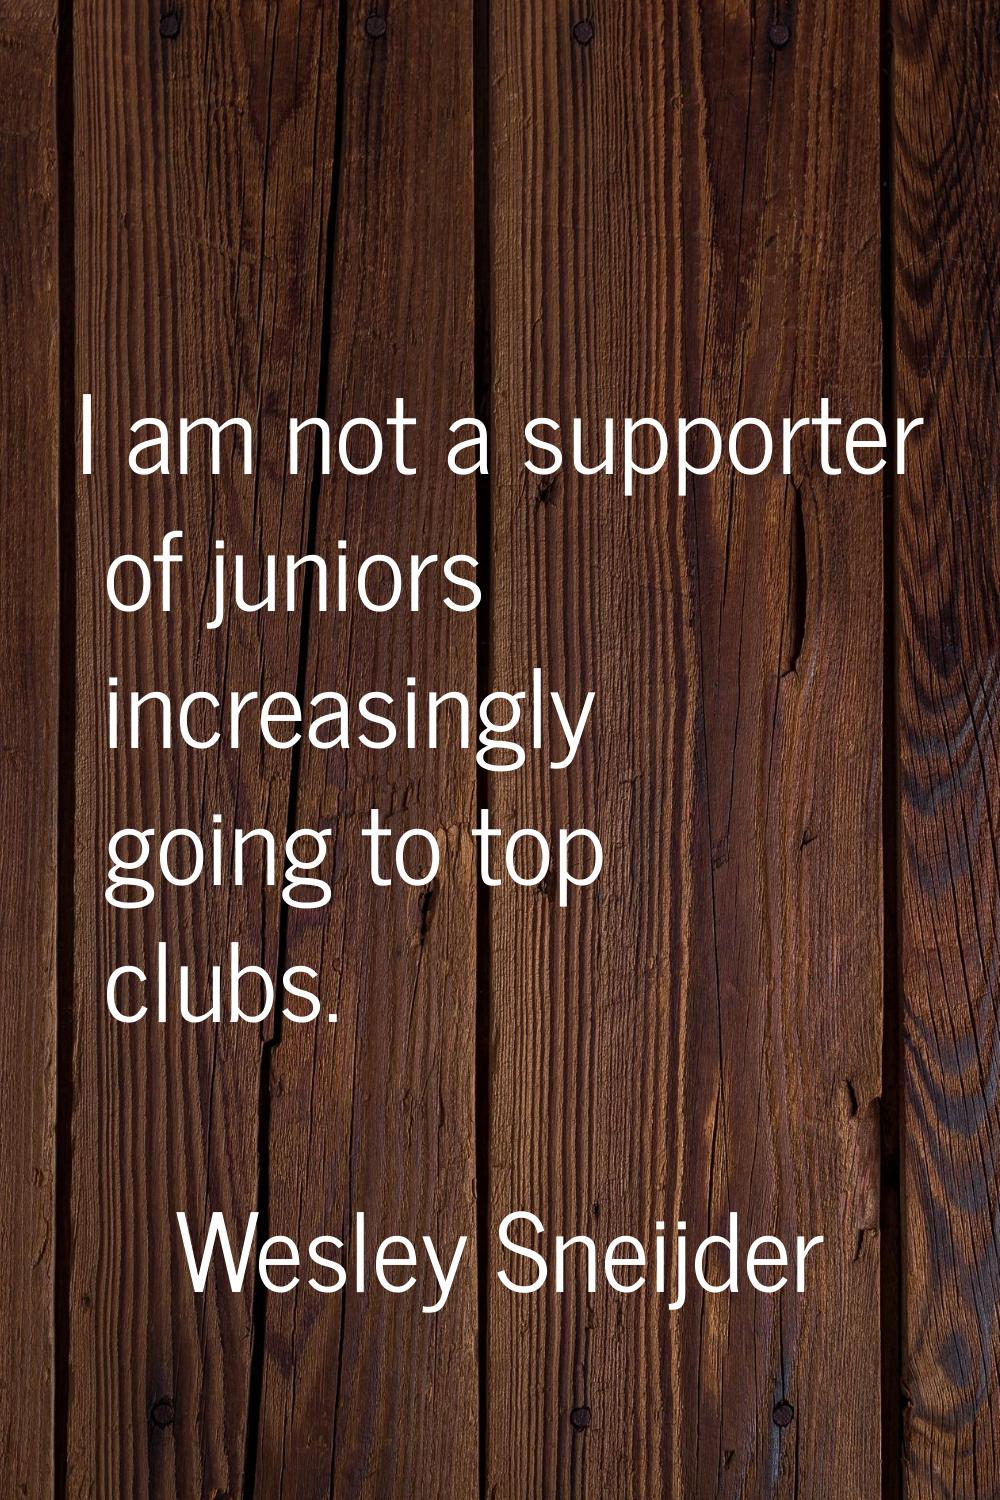 I am not a supporter of juniors increasingly going to top clubs.